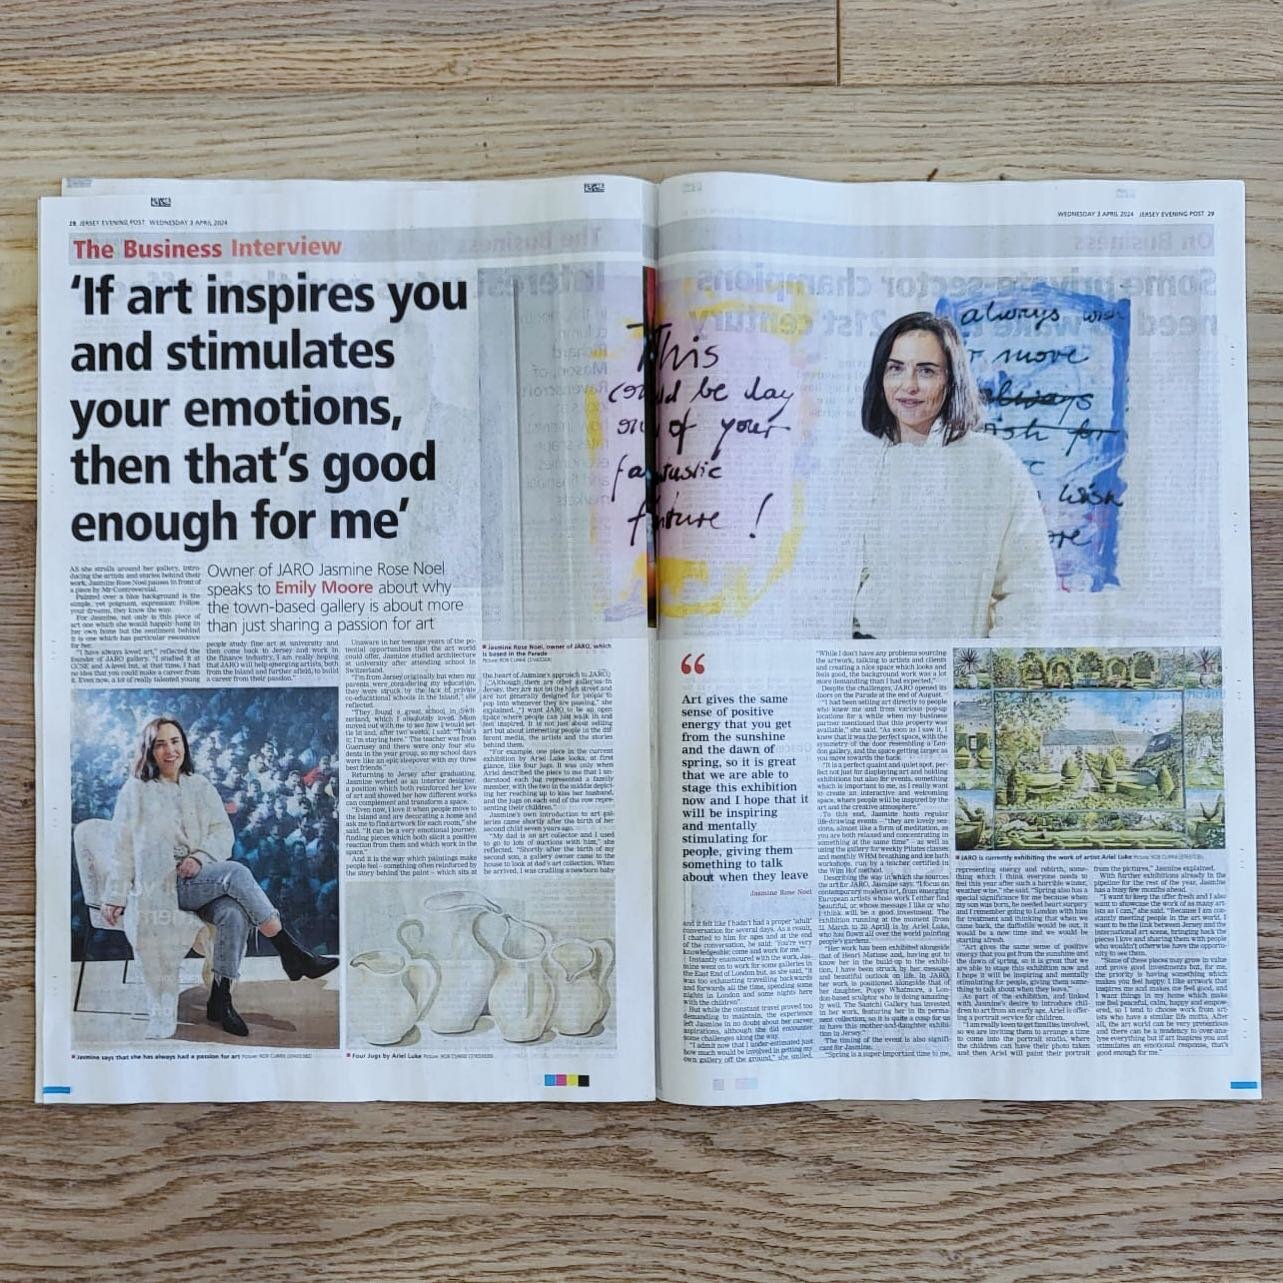 JARO Gallery is featured in the business interview section of todays @jepnews 😀 pick up a copy at your local shop to read the scoop!

#jerseyci #channelislands #jerseychannelislands #localbusiness #shoplocal #lovelocal #visitjersey #visitjerseyci